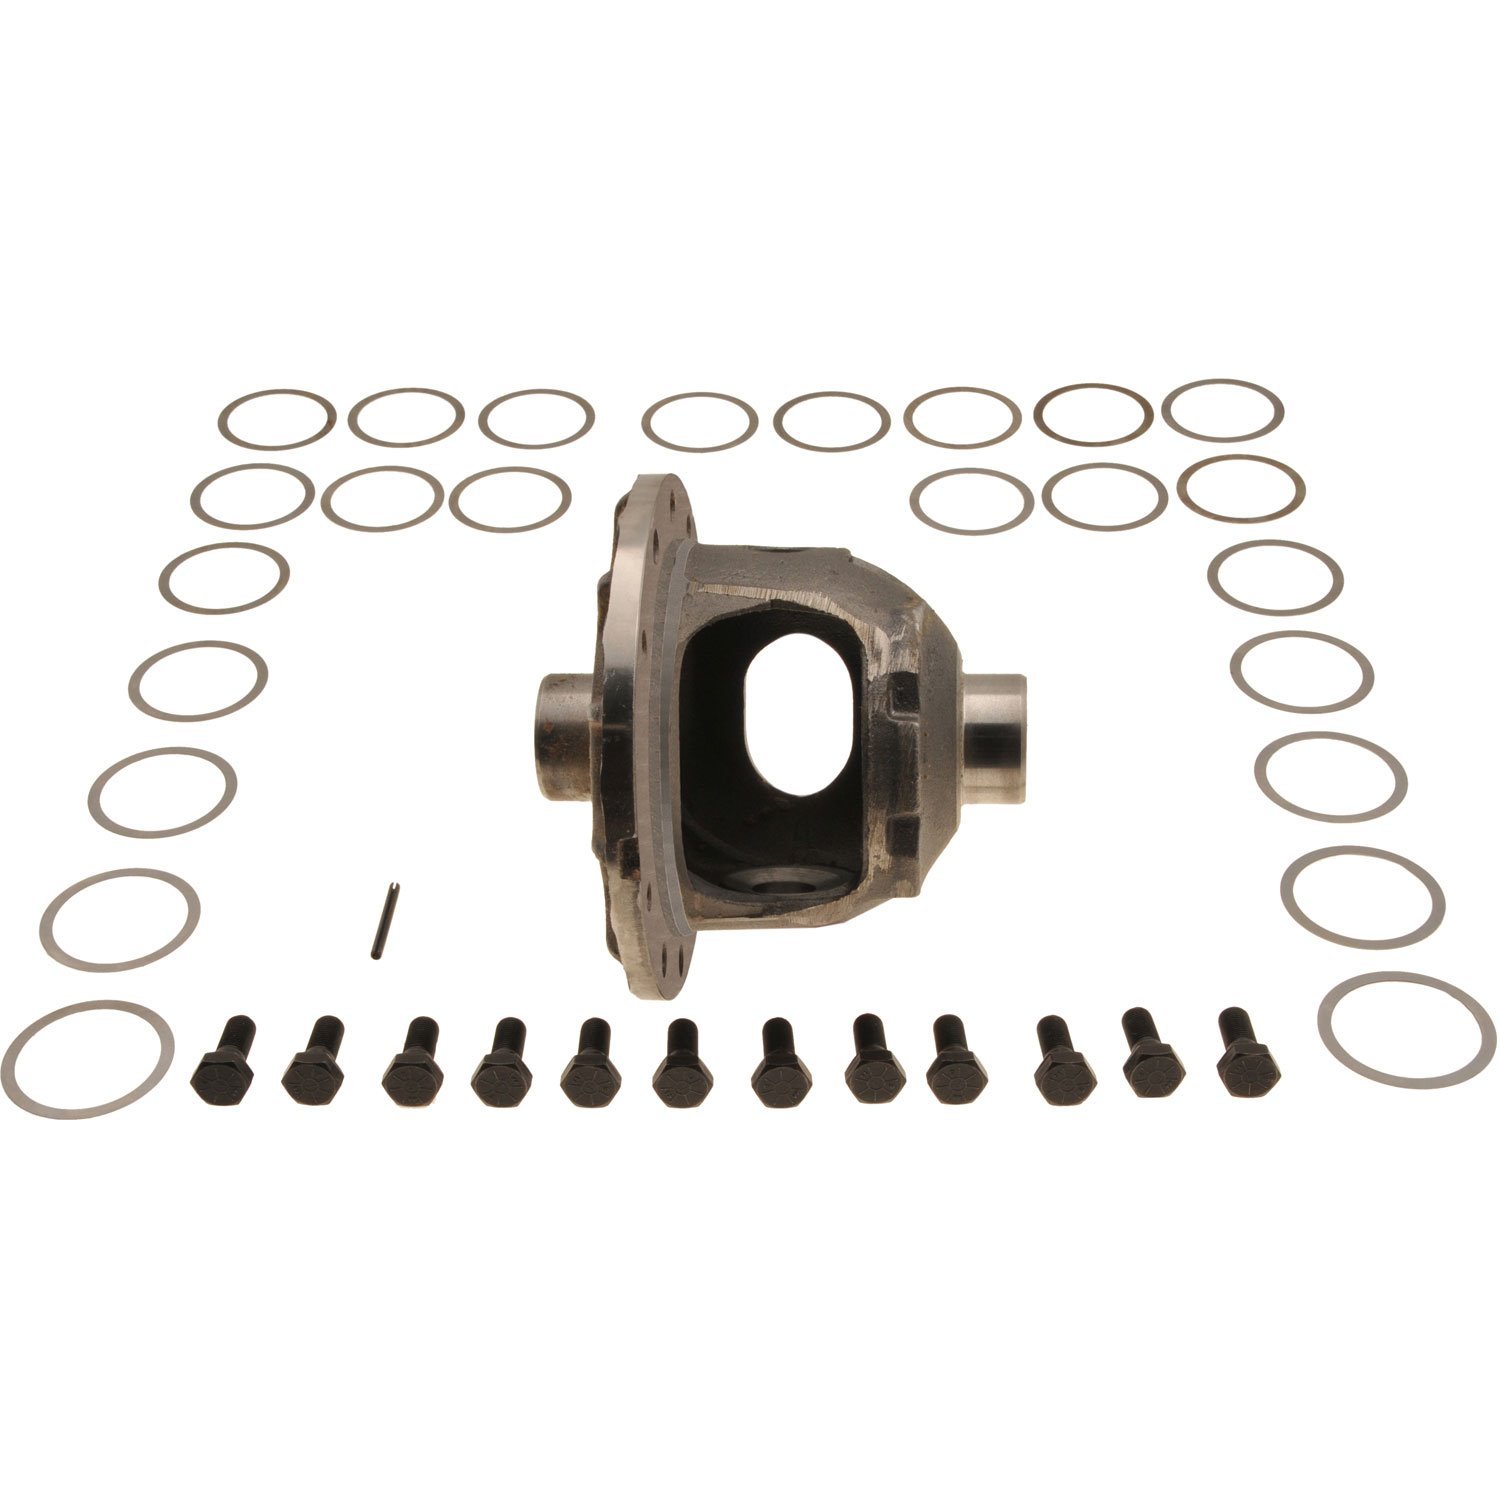 Differential Carrier Kit - w/o Inner Gears Fits: